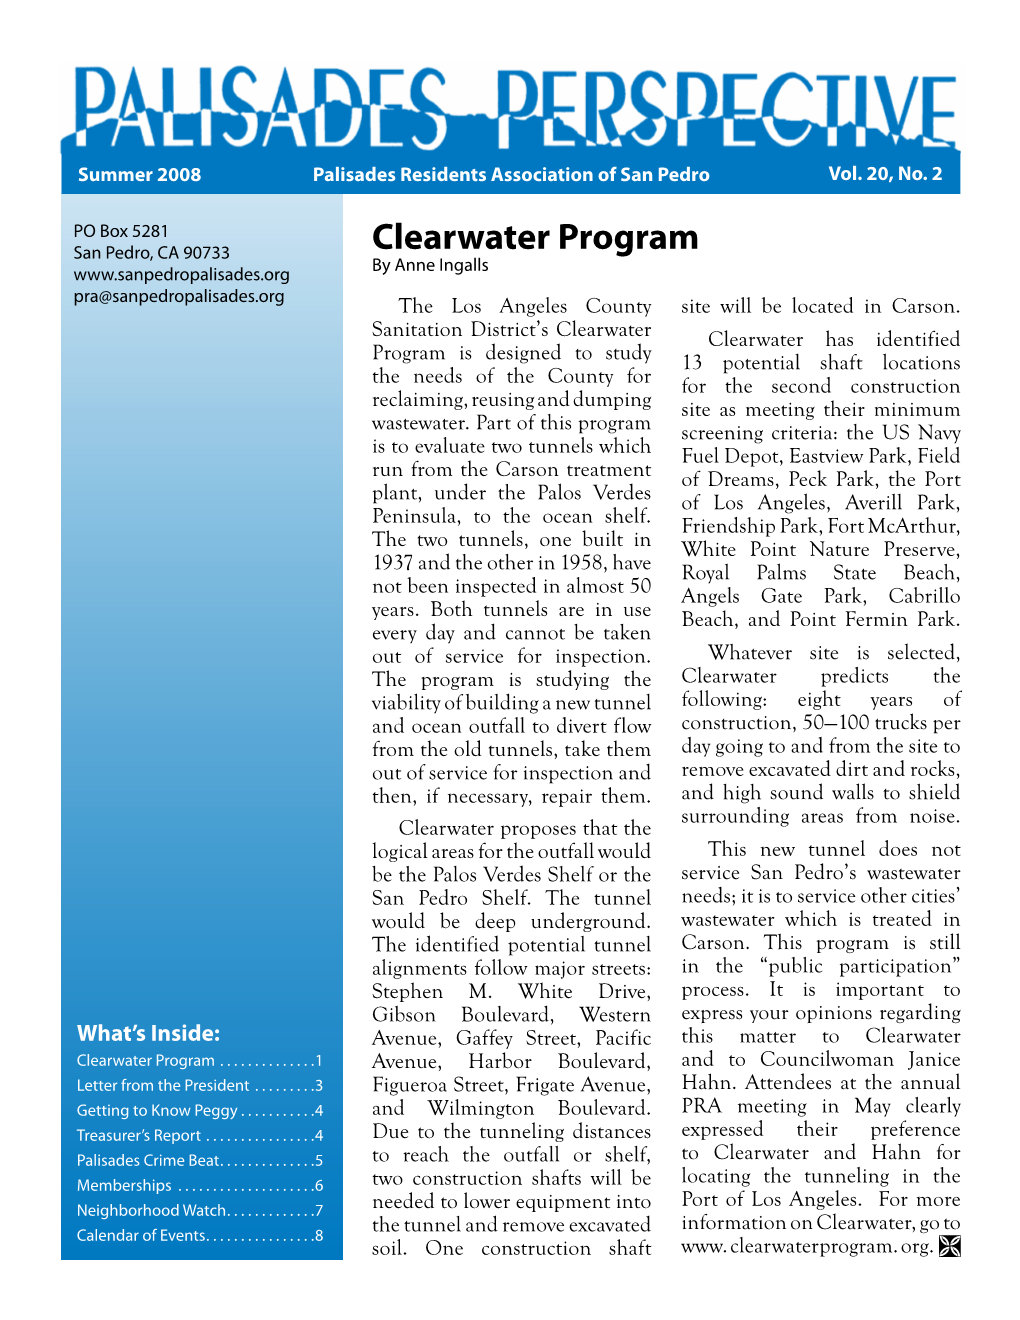 Clearwater Program by Anne Ingalls Pra@Sanpedropalisades.Org the Los Angeles County Site Will Be Located in Carson